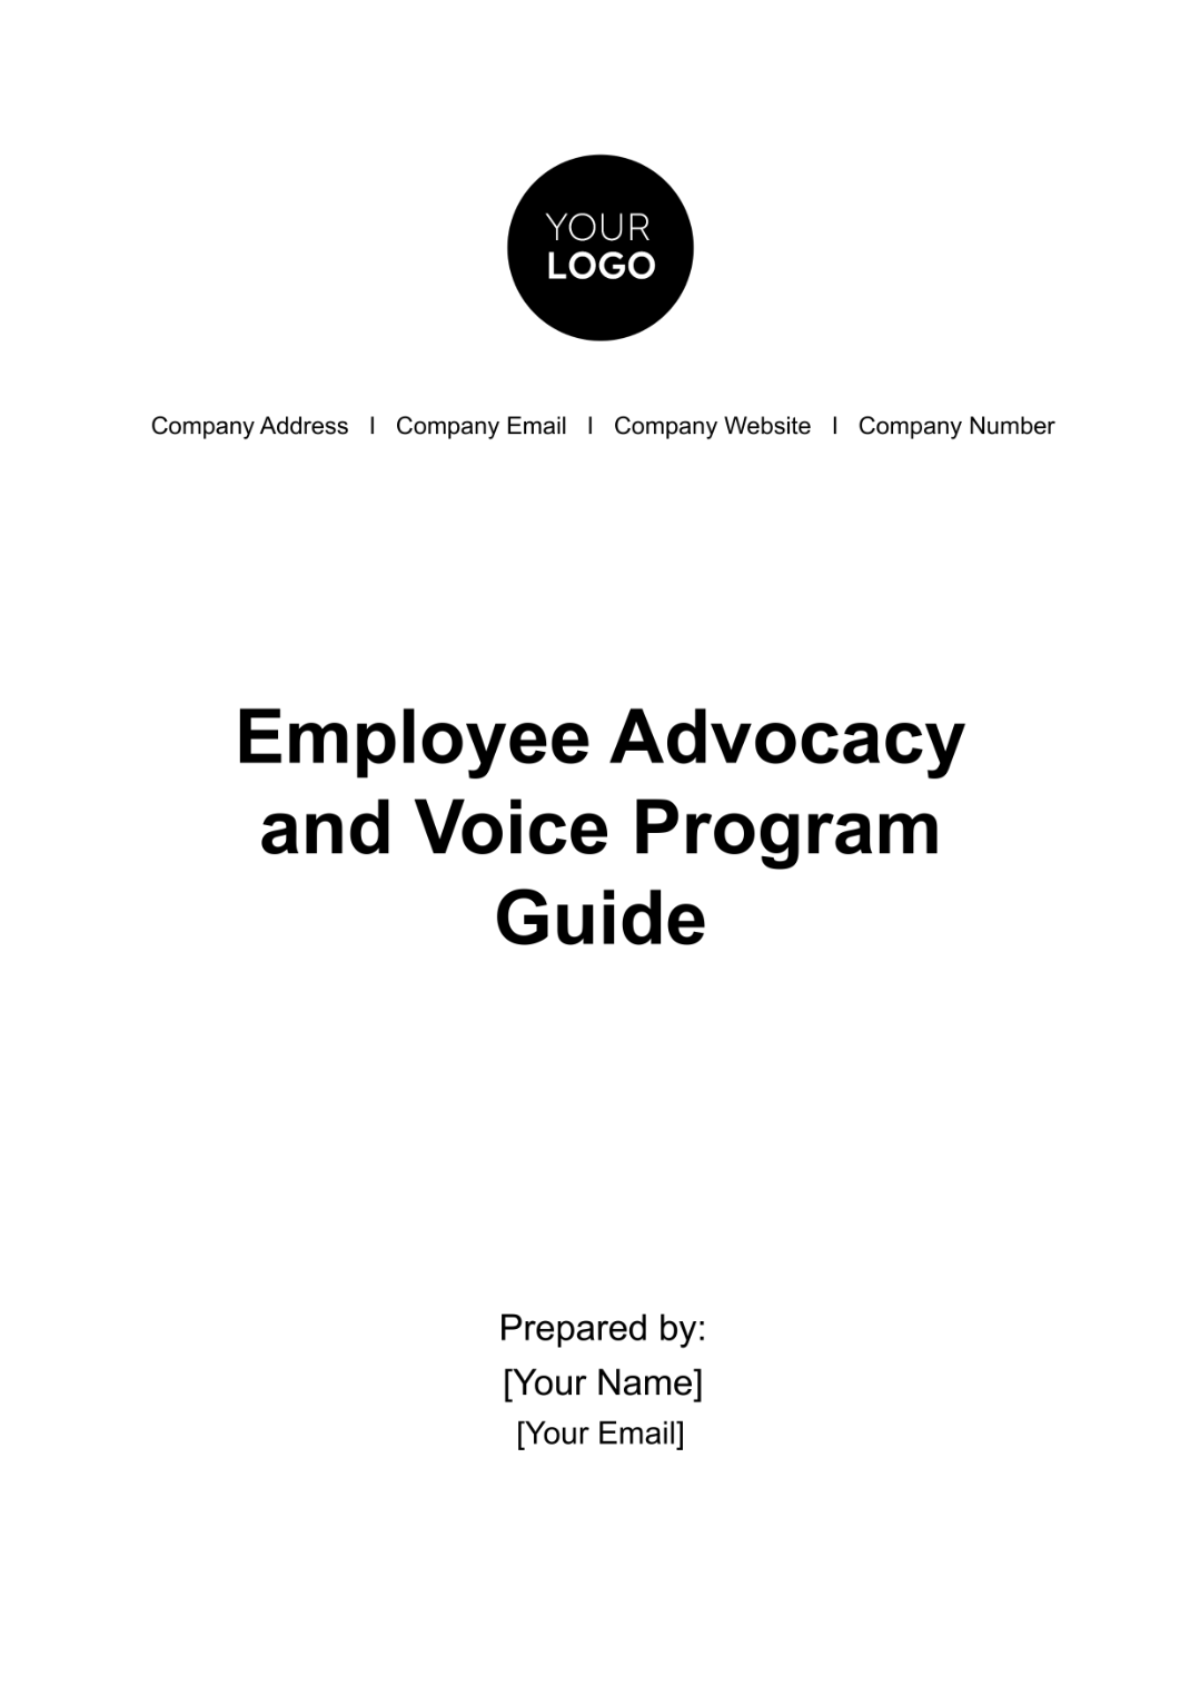 Free Employee Advocacy and Voice Program Guide HR Template